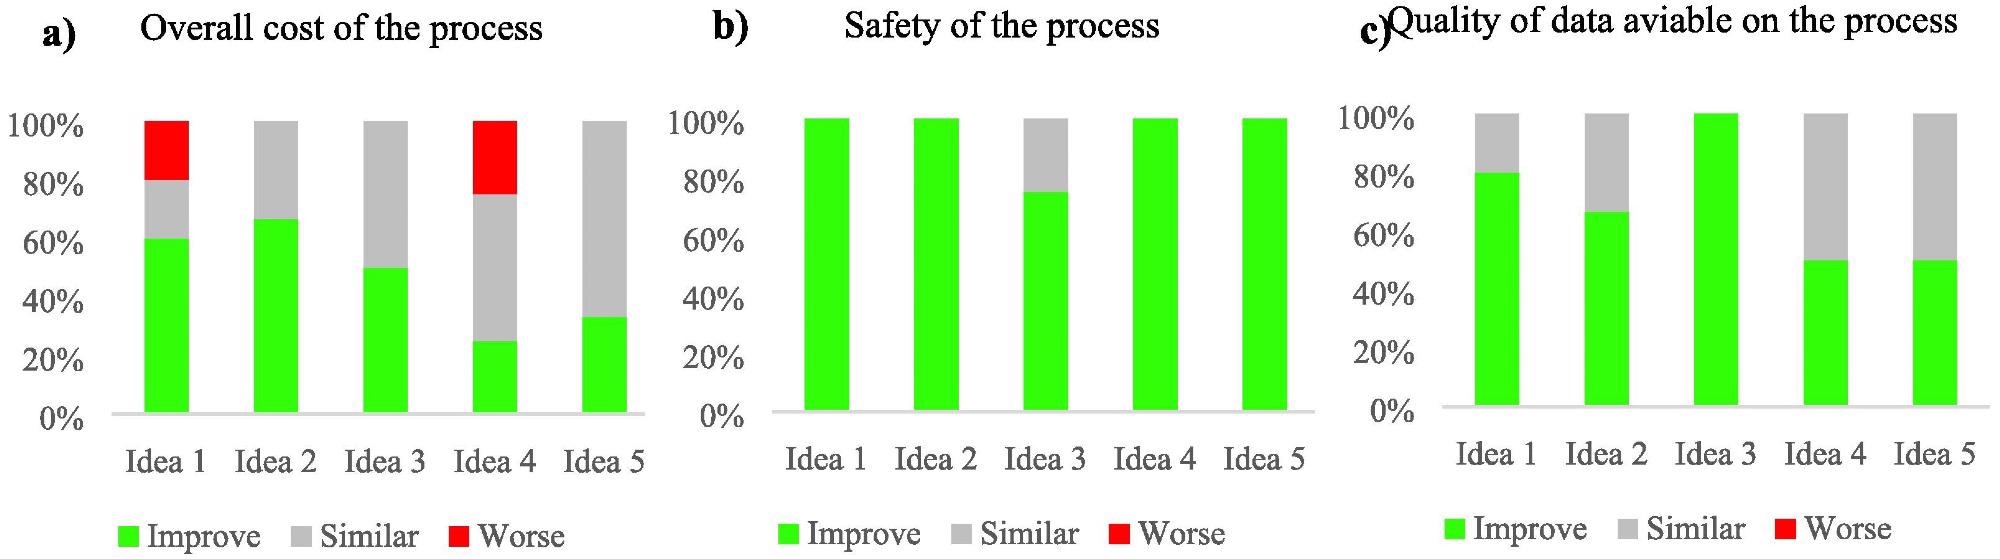 Results from an initial survey with the industry of the five ideas created. Graph (a) indicates the view of experts on the impact of the new proposed idea on overall process cost, (b) shows the views of impact on safety, and (c) shows the views on the impact on the quality of data collected about the processes.